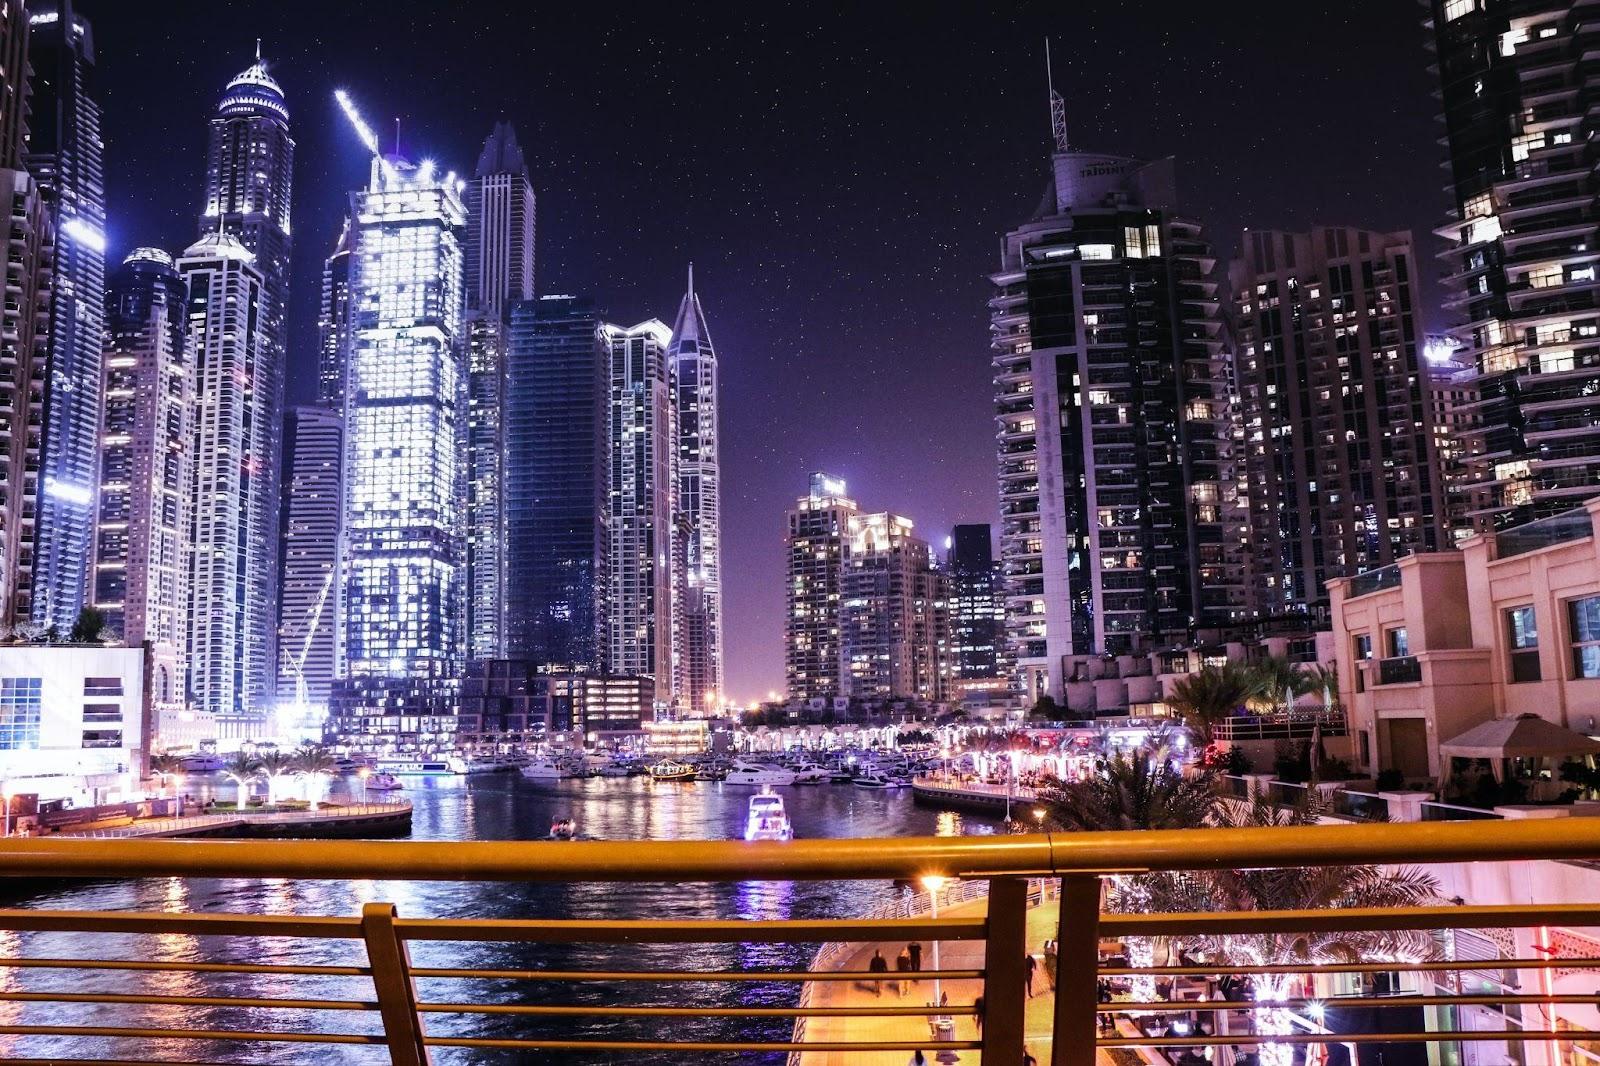 A picture if Dubai at night, featuring lit up buildings behind a lake.